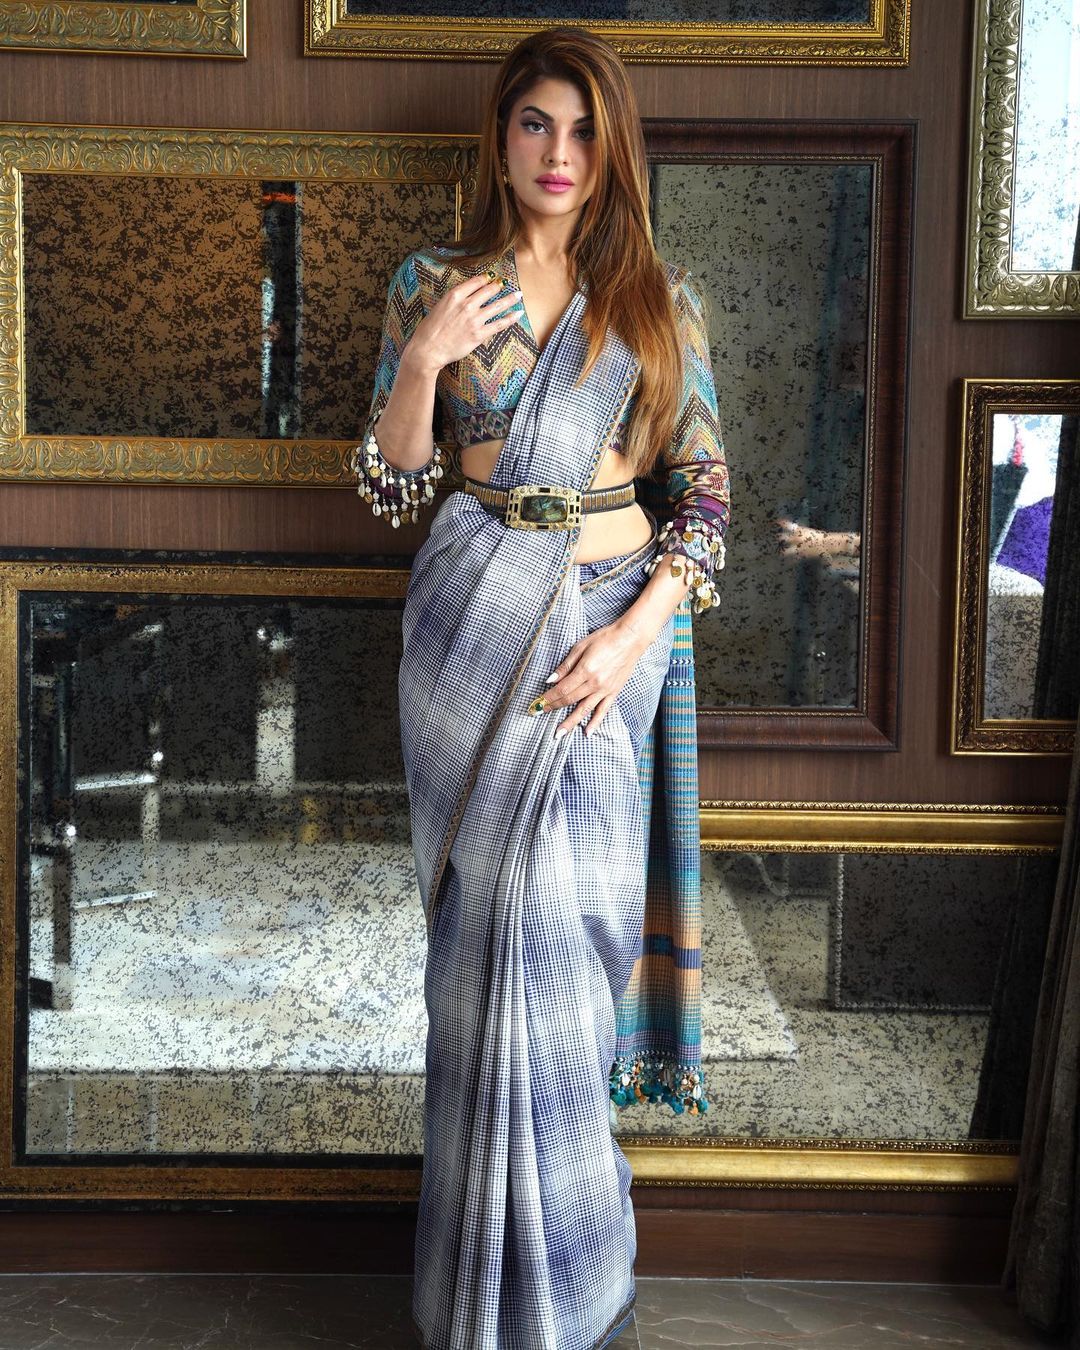 Jacqueline Fernandez looks graceful in the printed saree